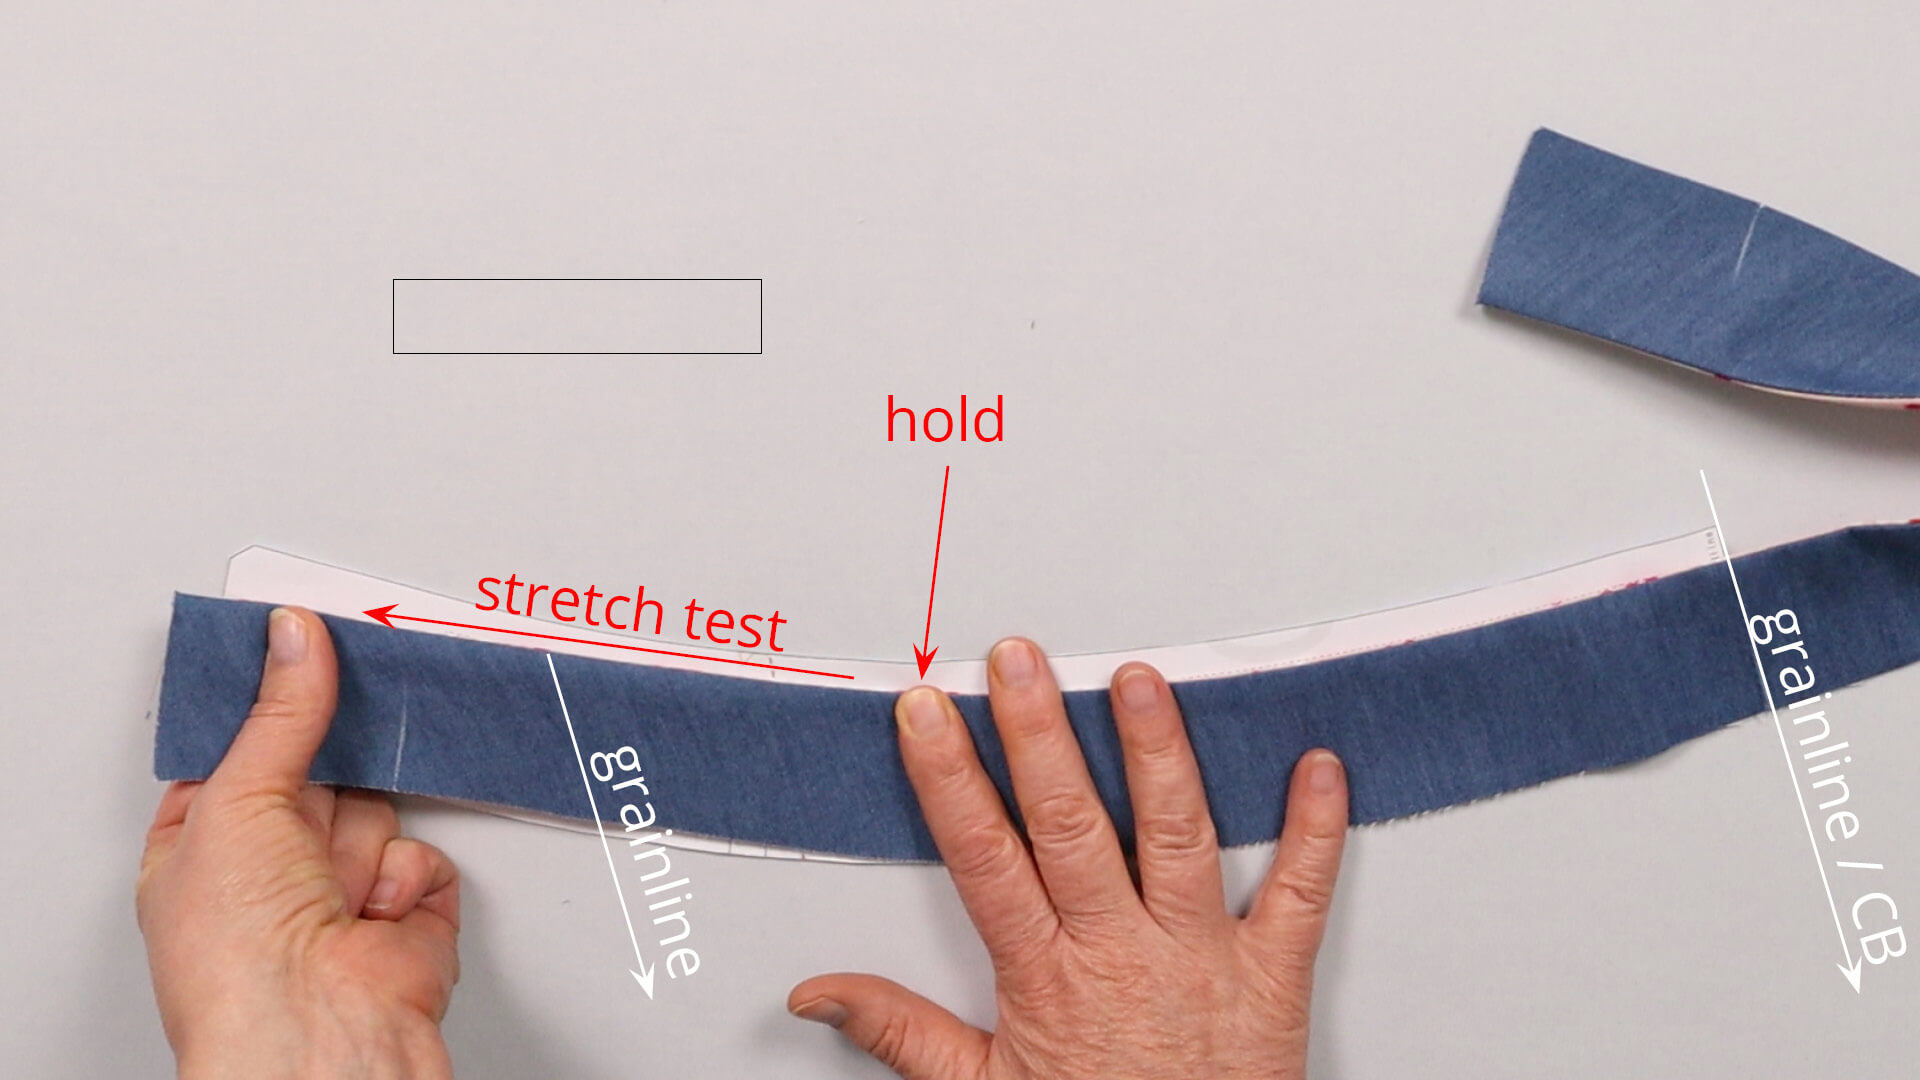 Hold the shaped waistband at the height of the side seam at the shortened upper edge of the waistband and test whether the seam at the front where the thread is diagonal still stretches